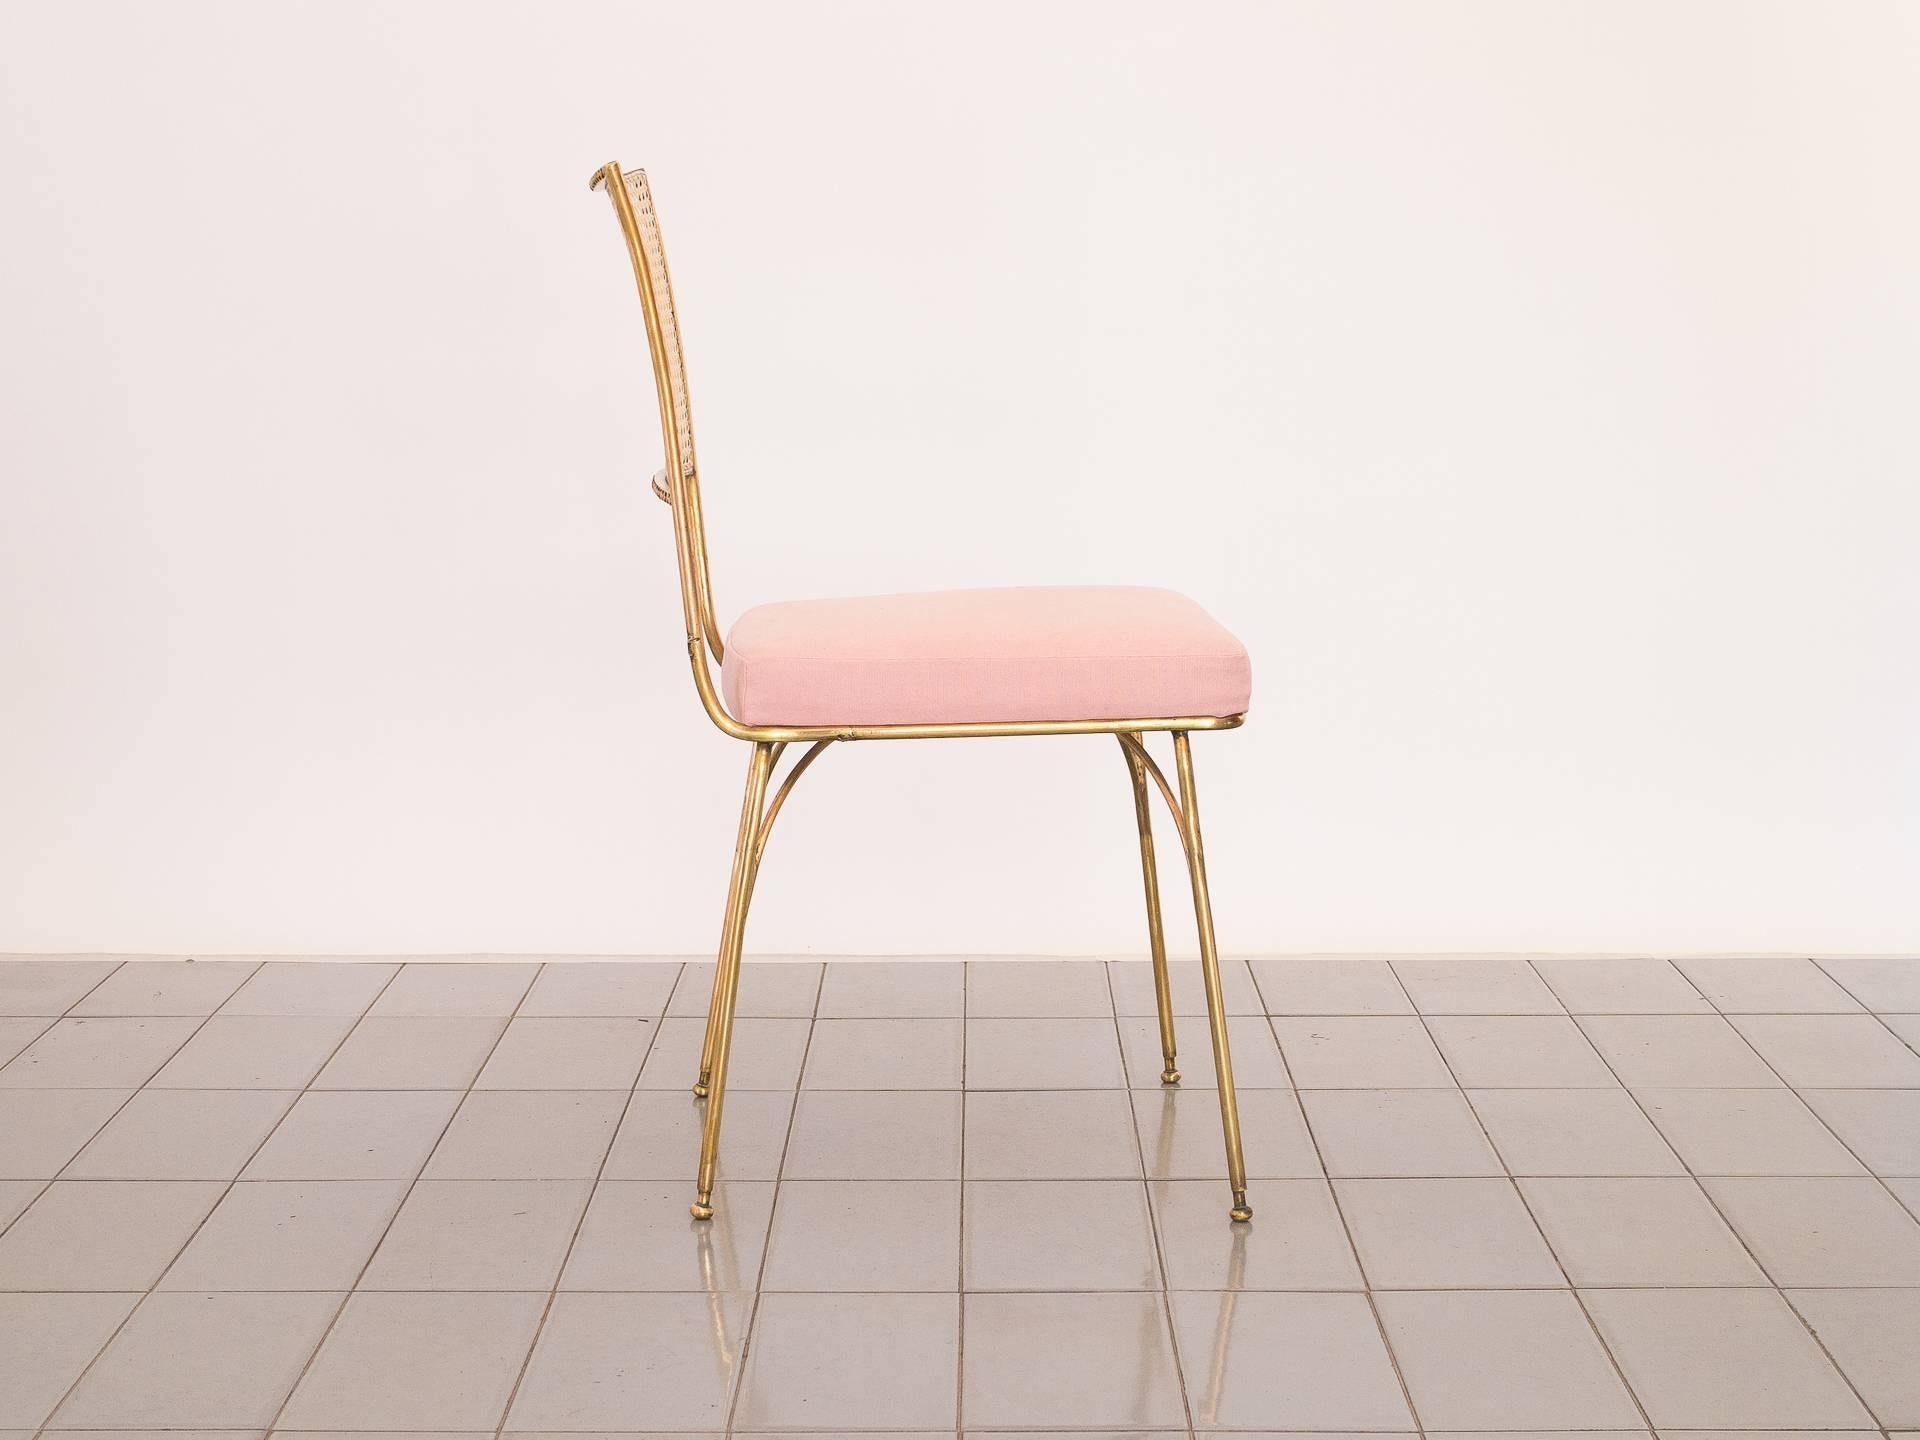 Unique chair by Borsoi, in nylon cane and full brass body. Recently polished. New upholstery in millenial pink cotton canvas.

We have three more units that will require welding but can be negotiated before restoration.

In 2017, we discovered a